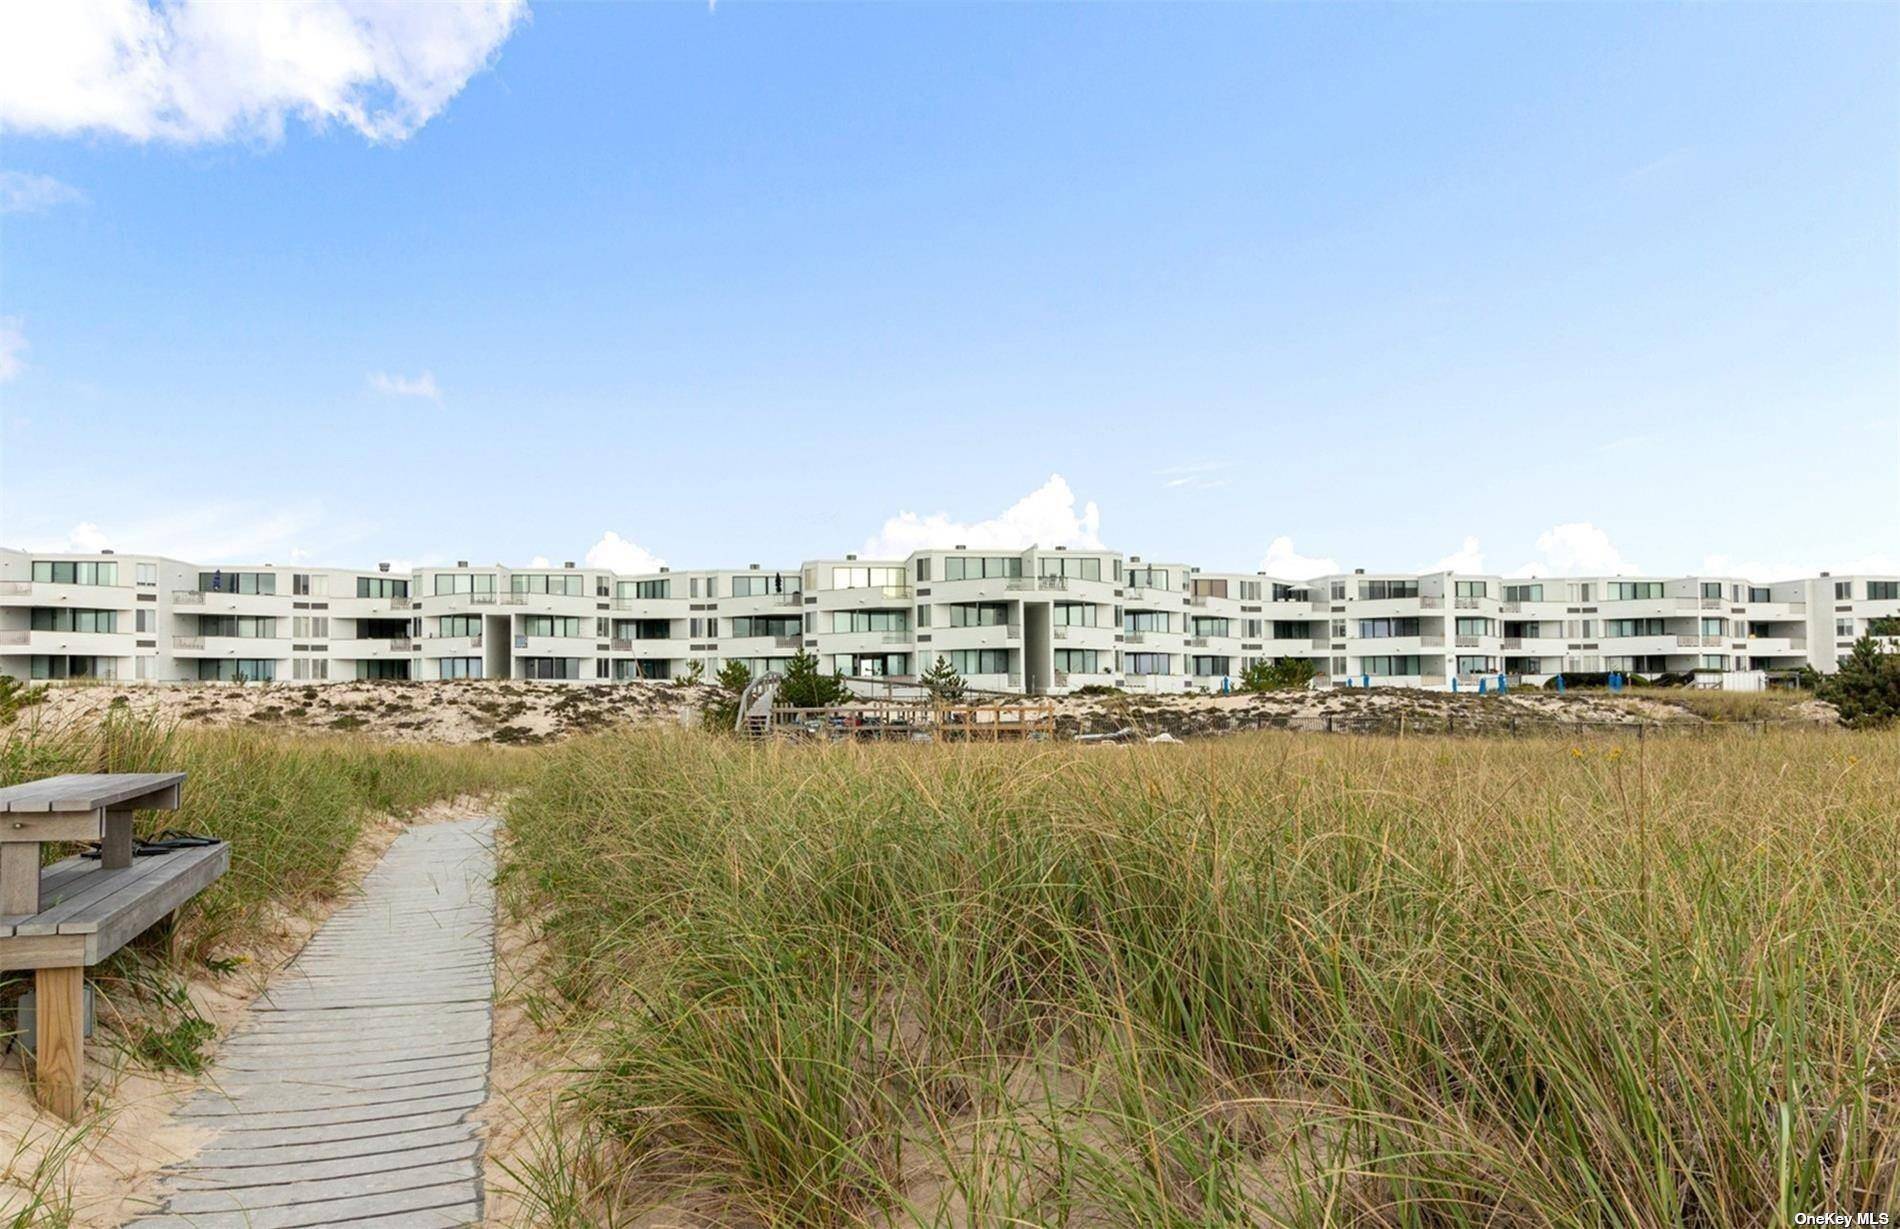 Ocean front Yardarm condominium featuring 2 bedrooms, 2 full bathrooms and an open floor plan with a full kitchen, bright sunny living room and plenty of closet space.